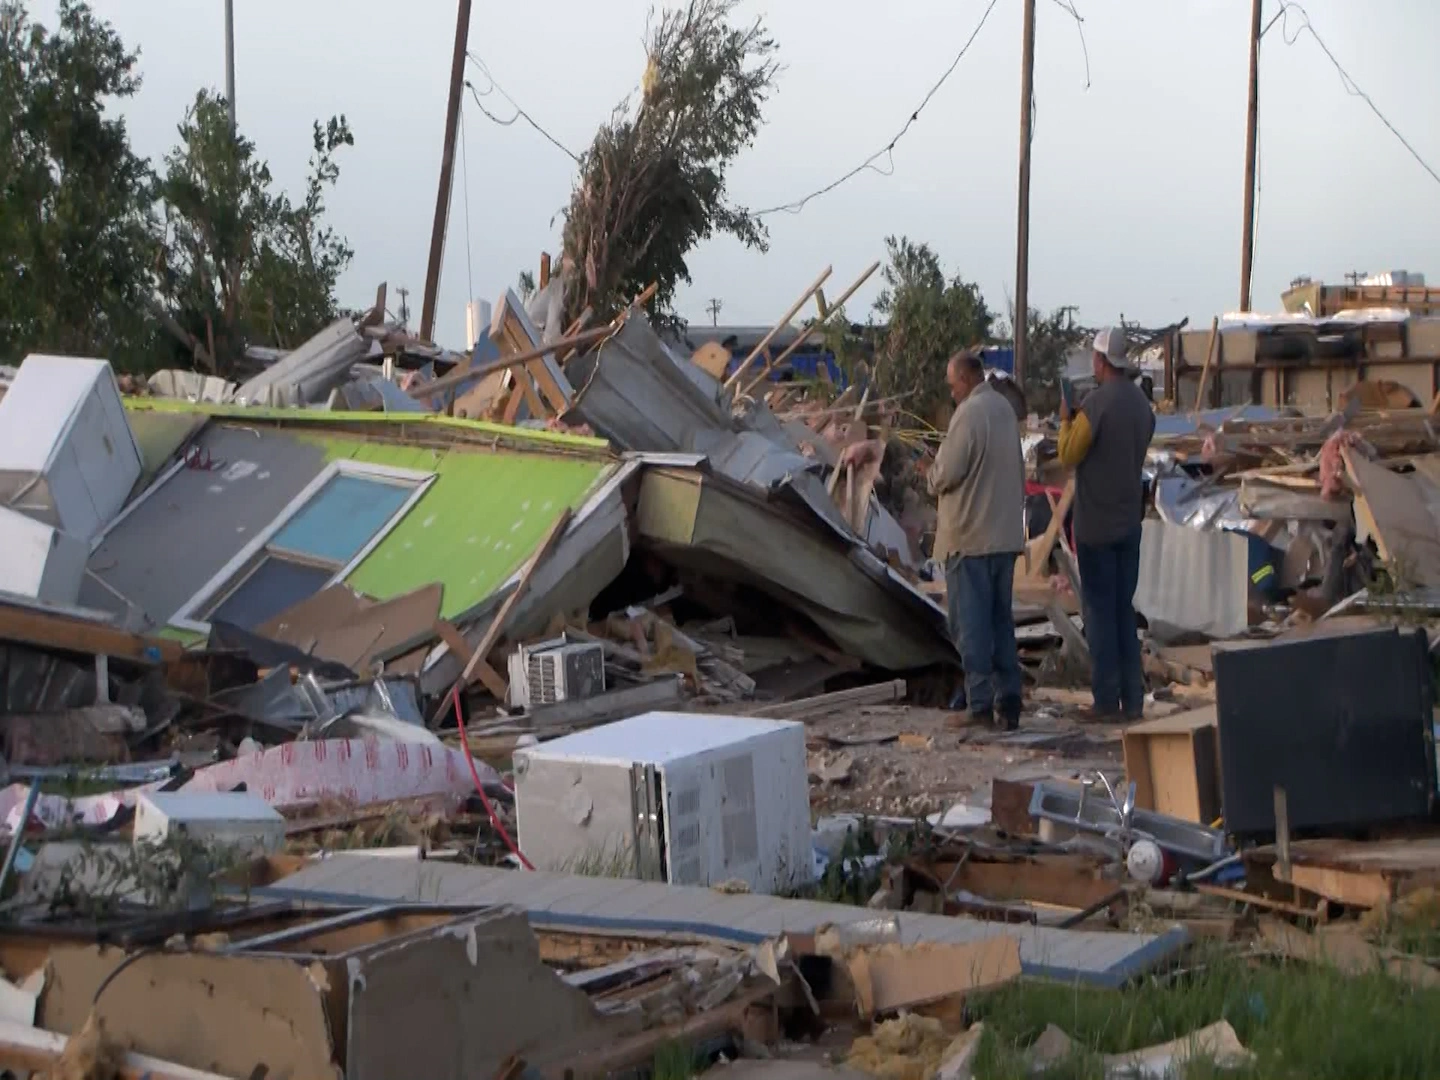 Perryton, Texas tornado leaves 3 dead, about 100 injured amid severe weather outbreak in South